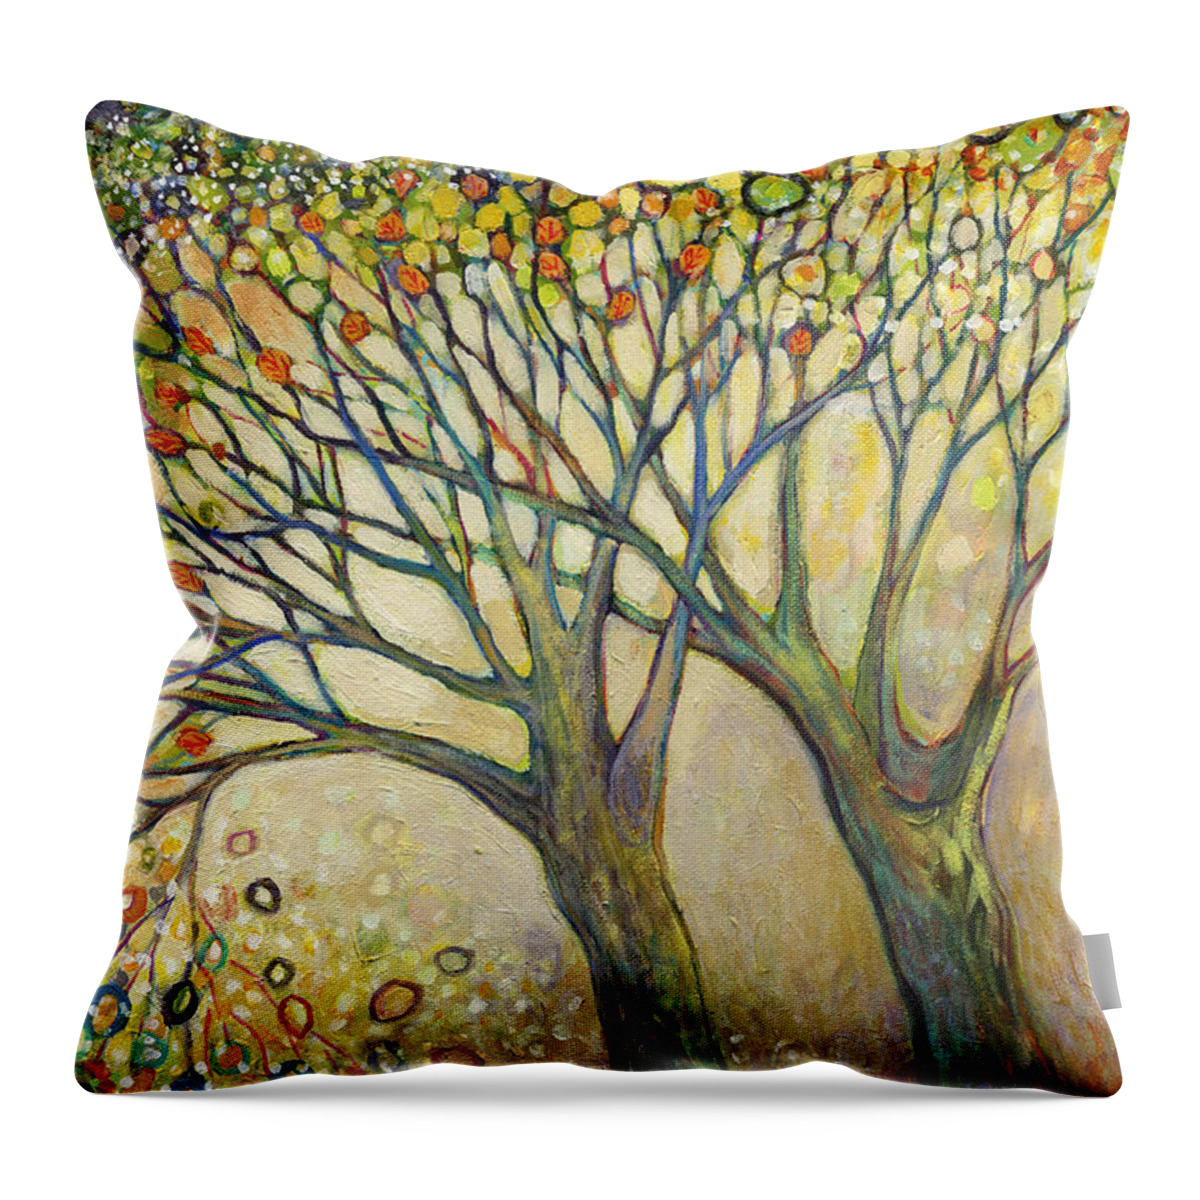 Tree Throw Pillow featuring the painting Entwined No 2 by Jennifer Lommers